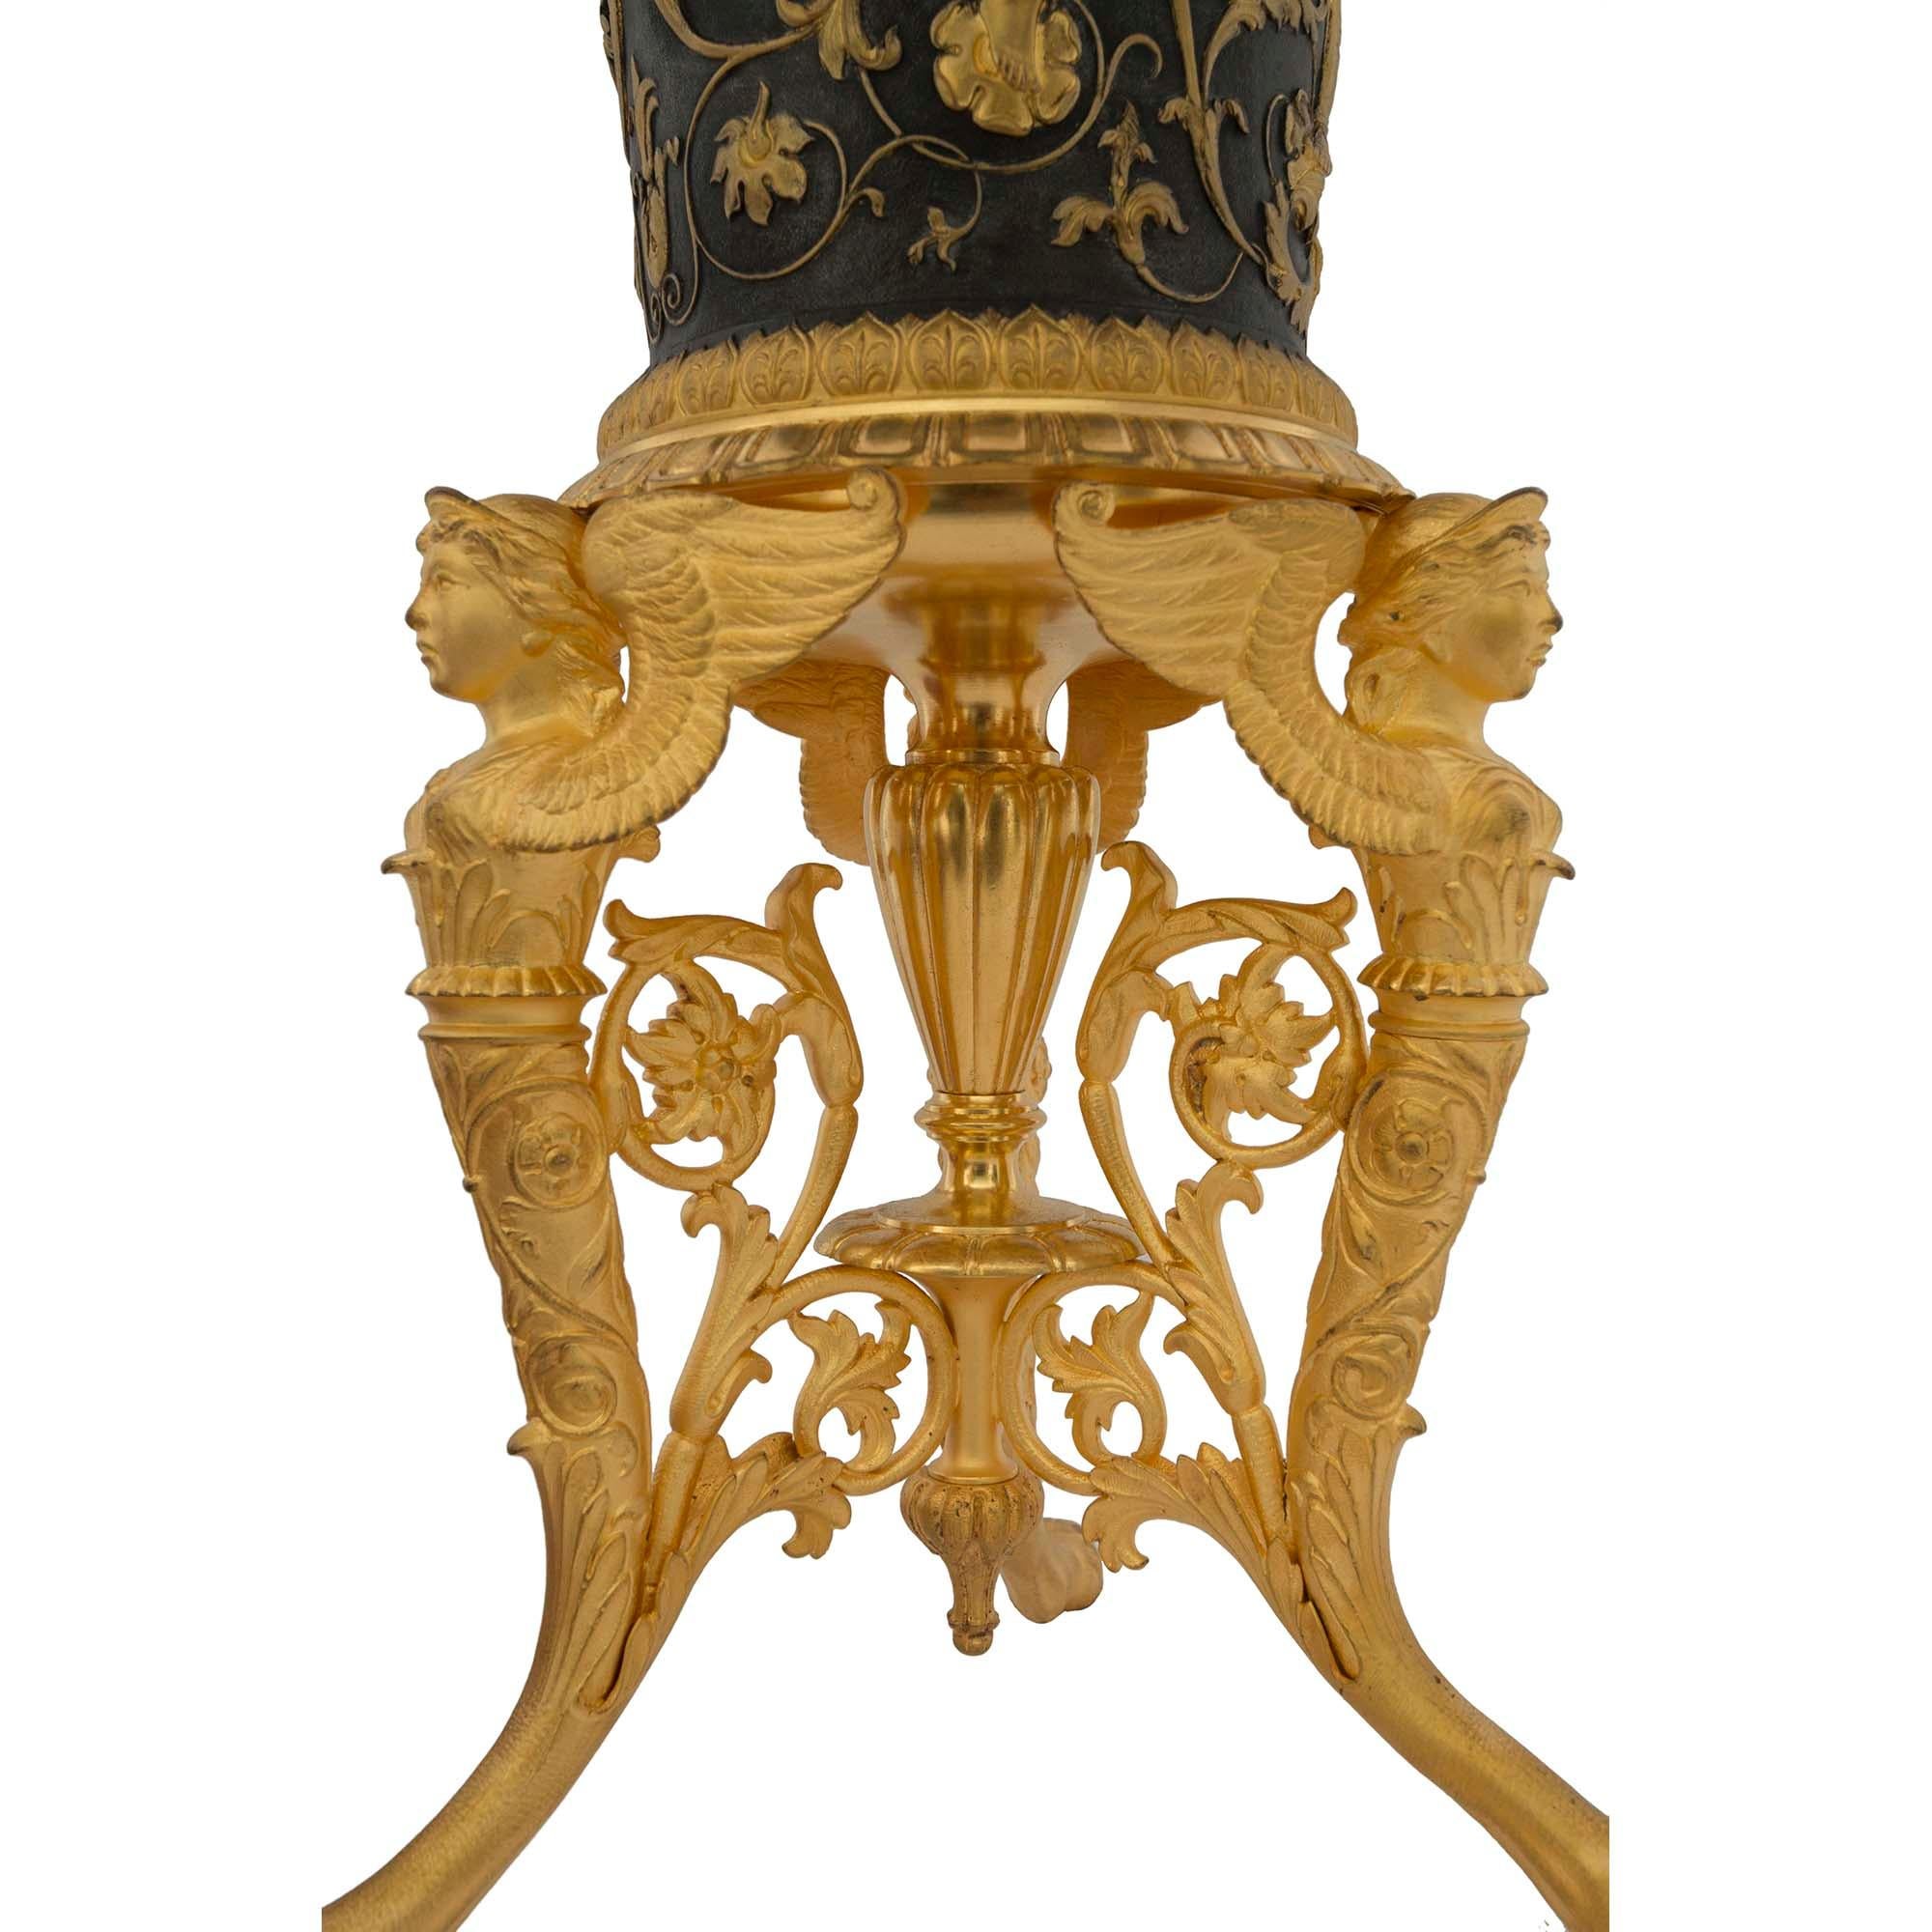 French 19th Century Neoclassical Style Bronze and Ormolu Urn For Sale 4